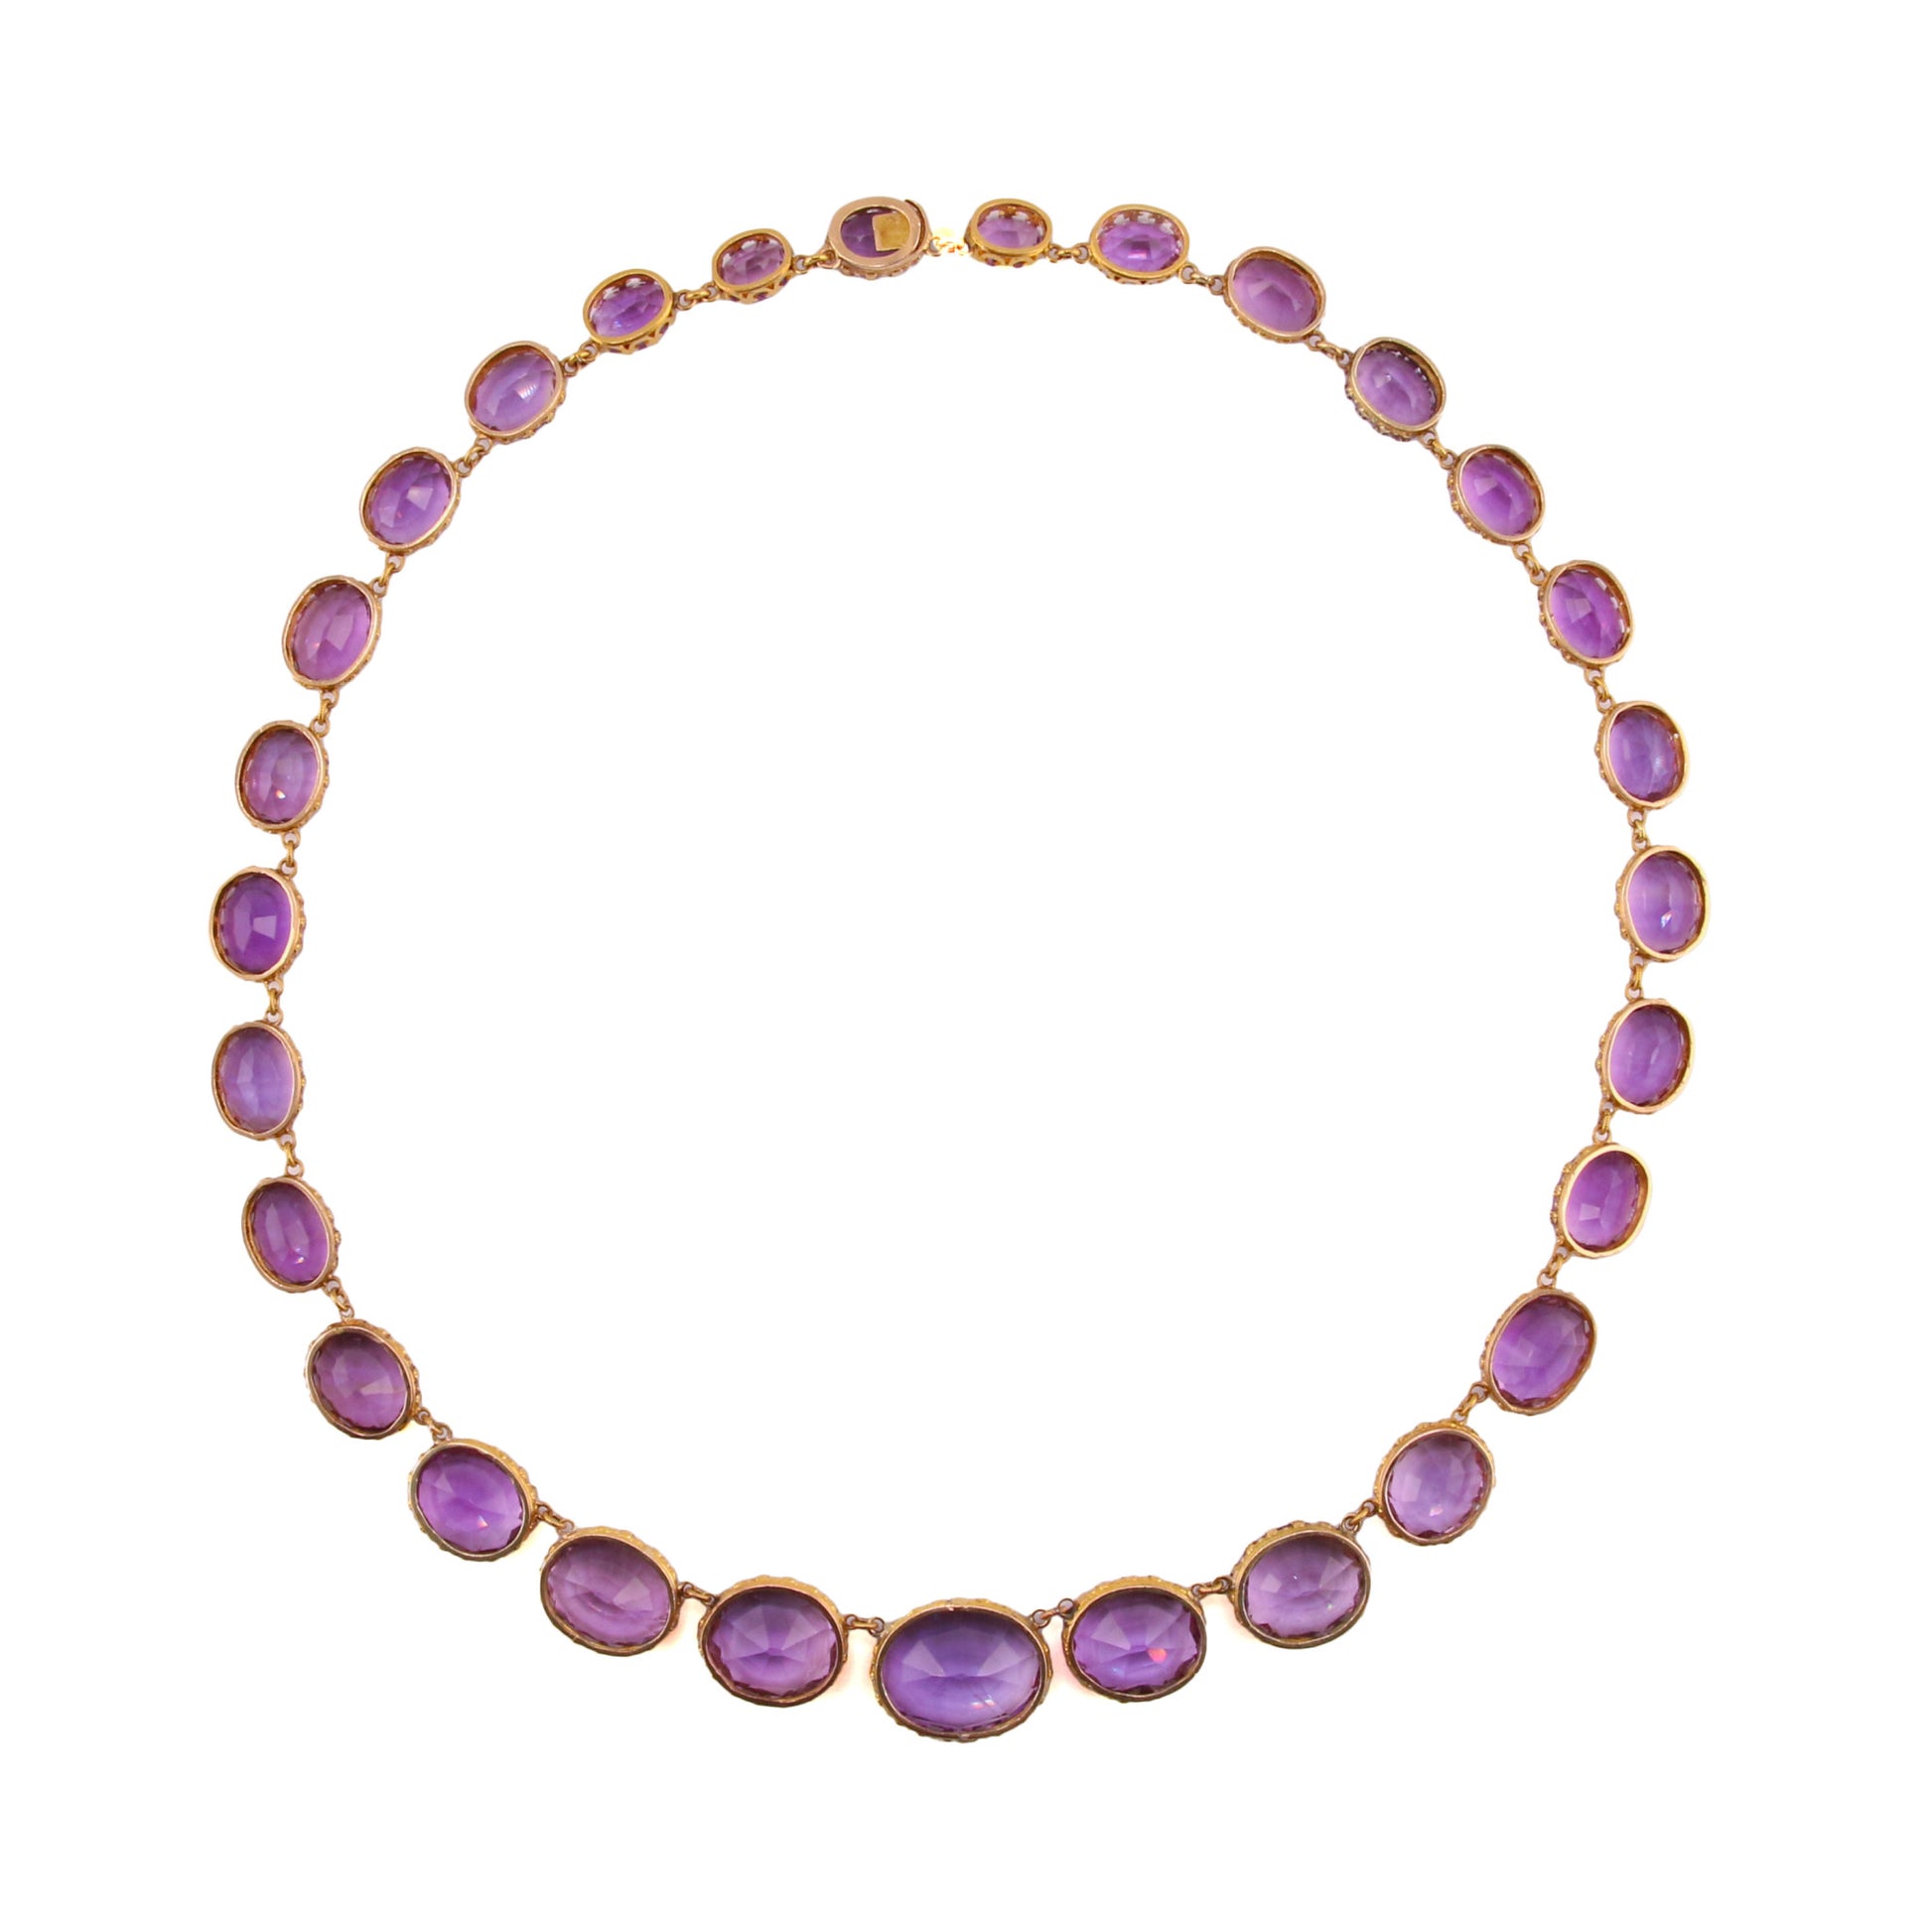 French Antique 18KT Yellow Gold Amethyst Necklace back